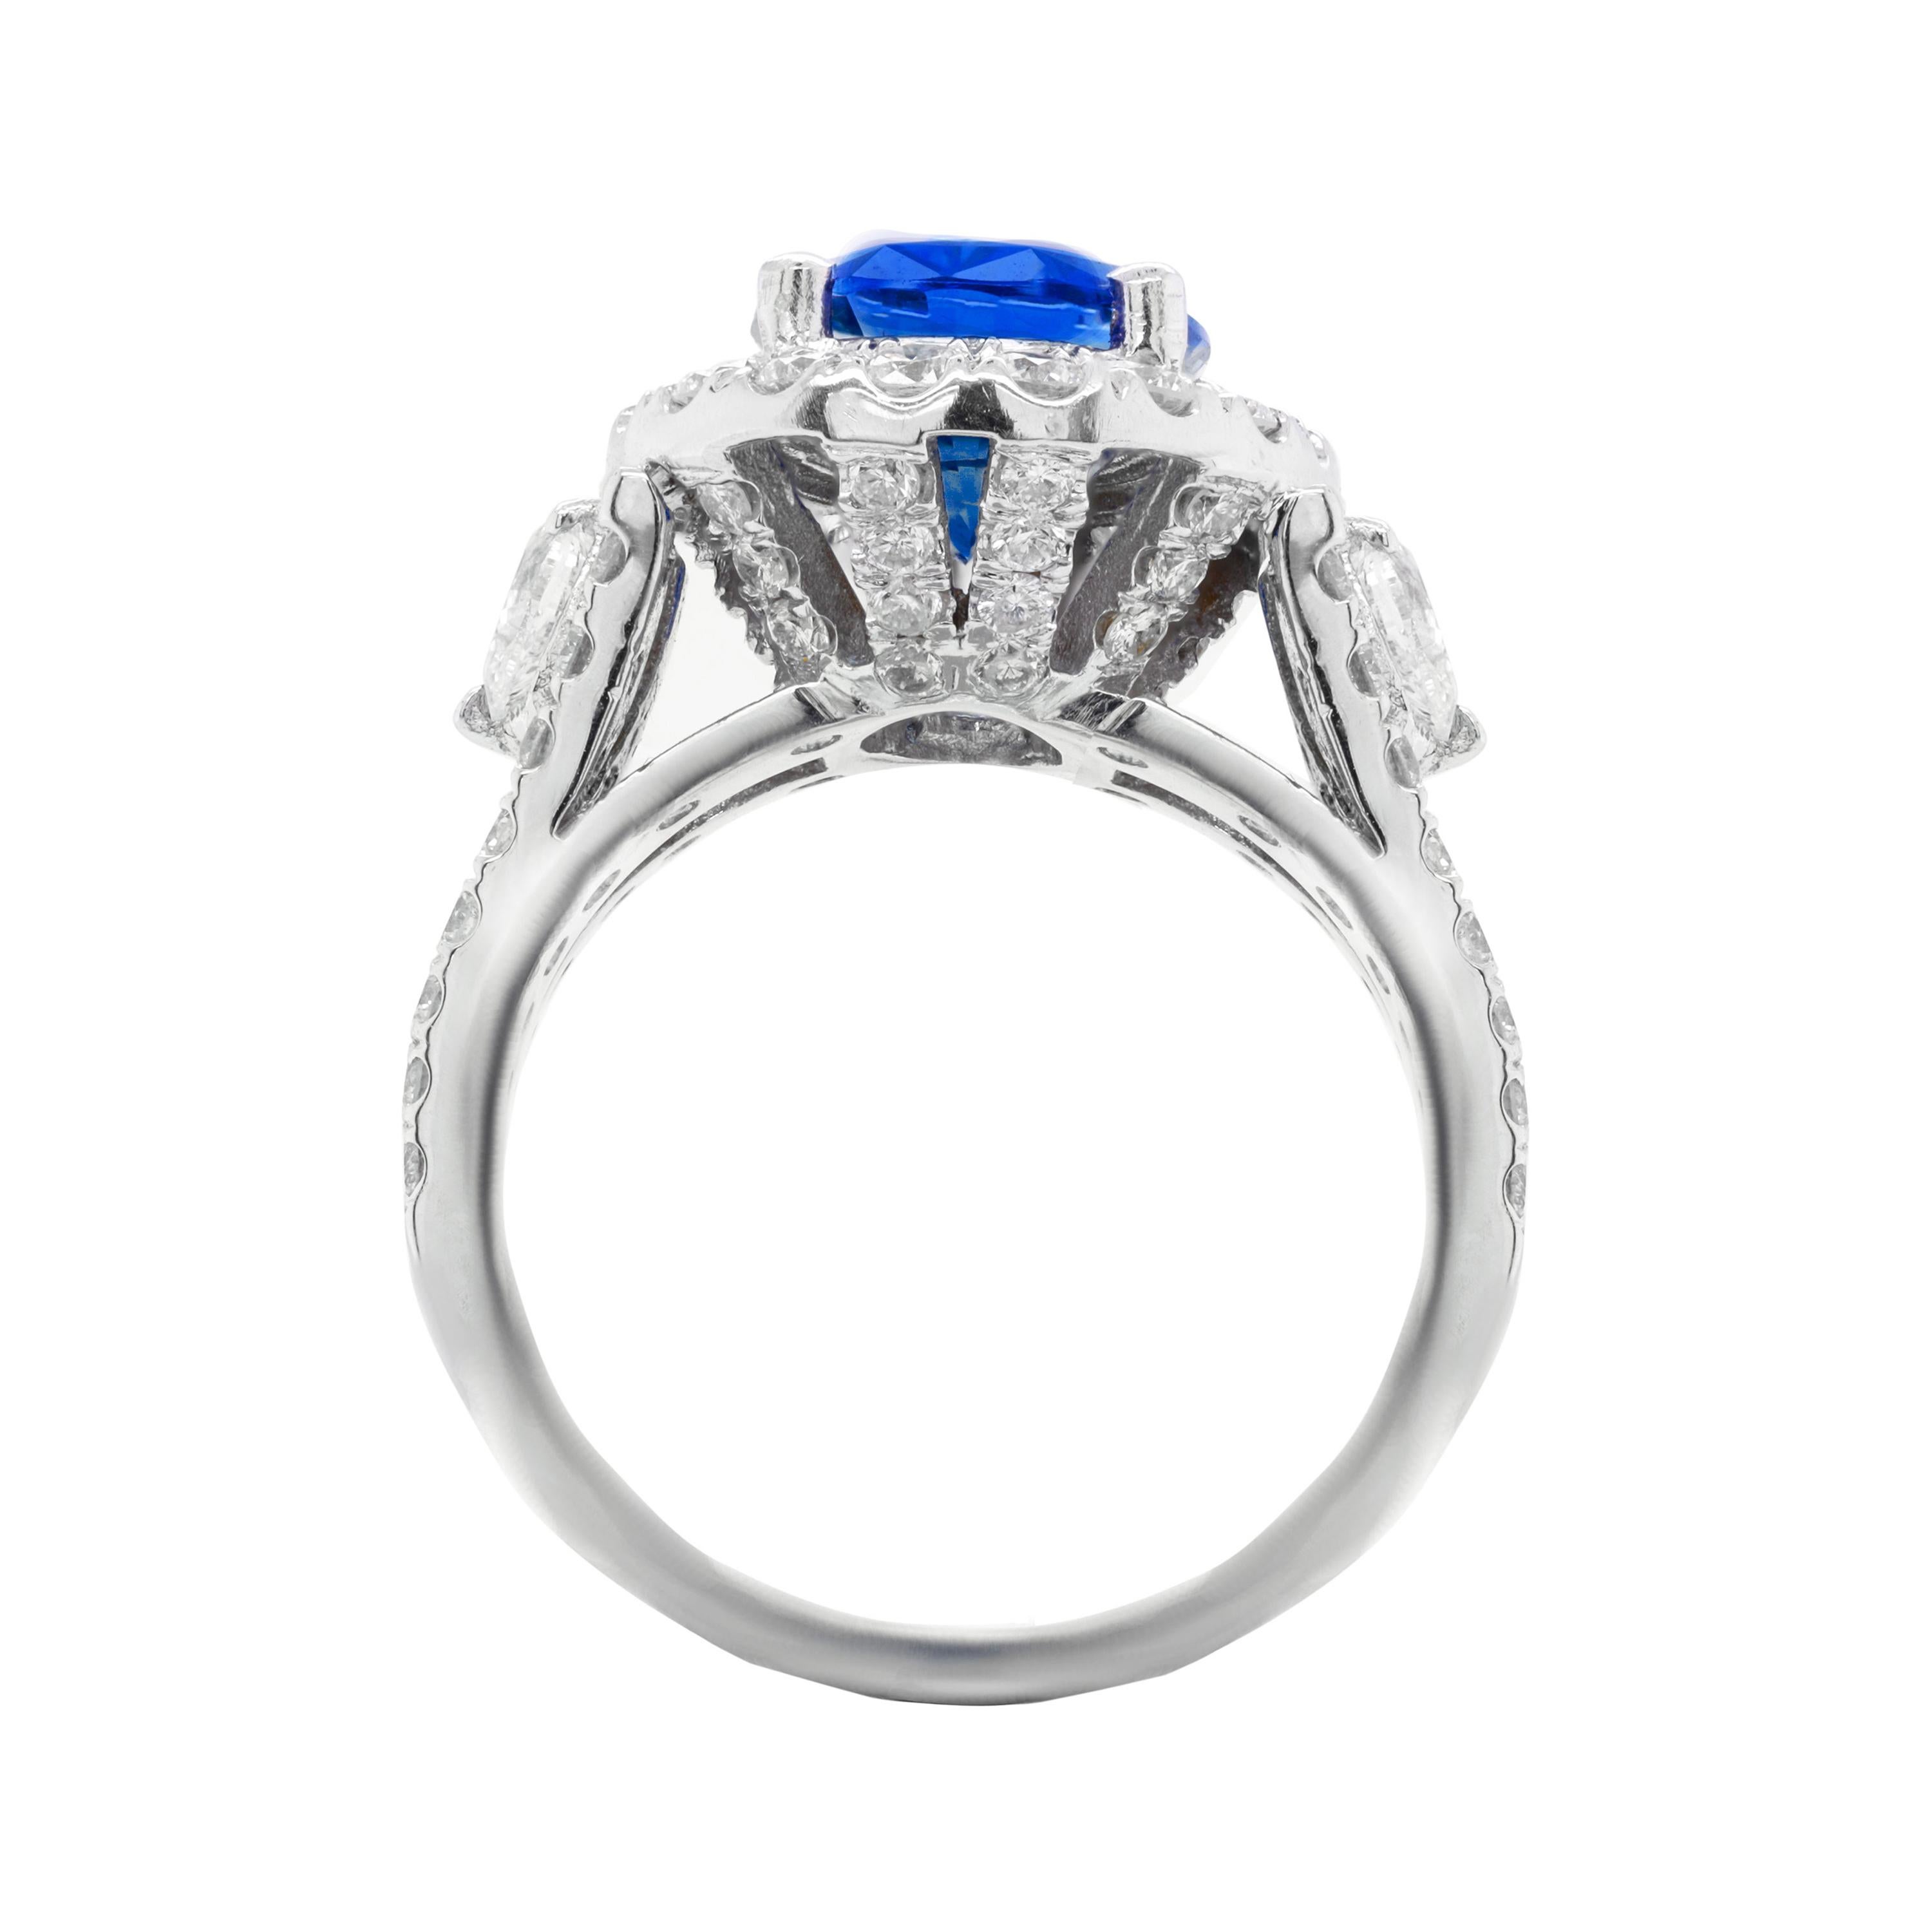 Magnificent 18kt gic certified blue sapphire diamond ring, 4.26ct sapphire set in diamond halo setting with two pear shape diamonds and micropave rd diamond total weight is 2.00ct
